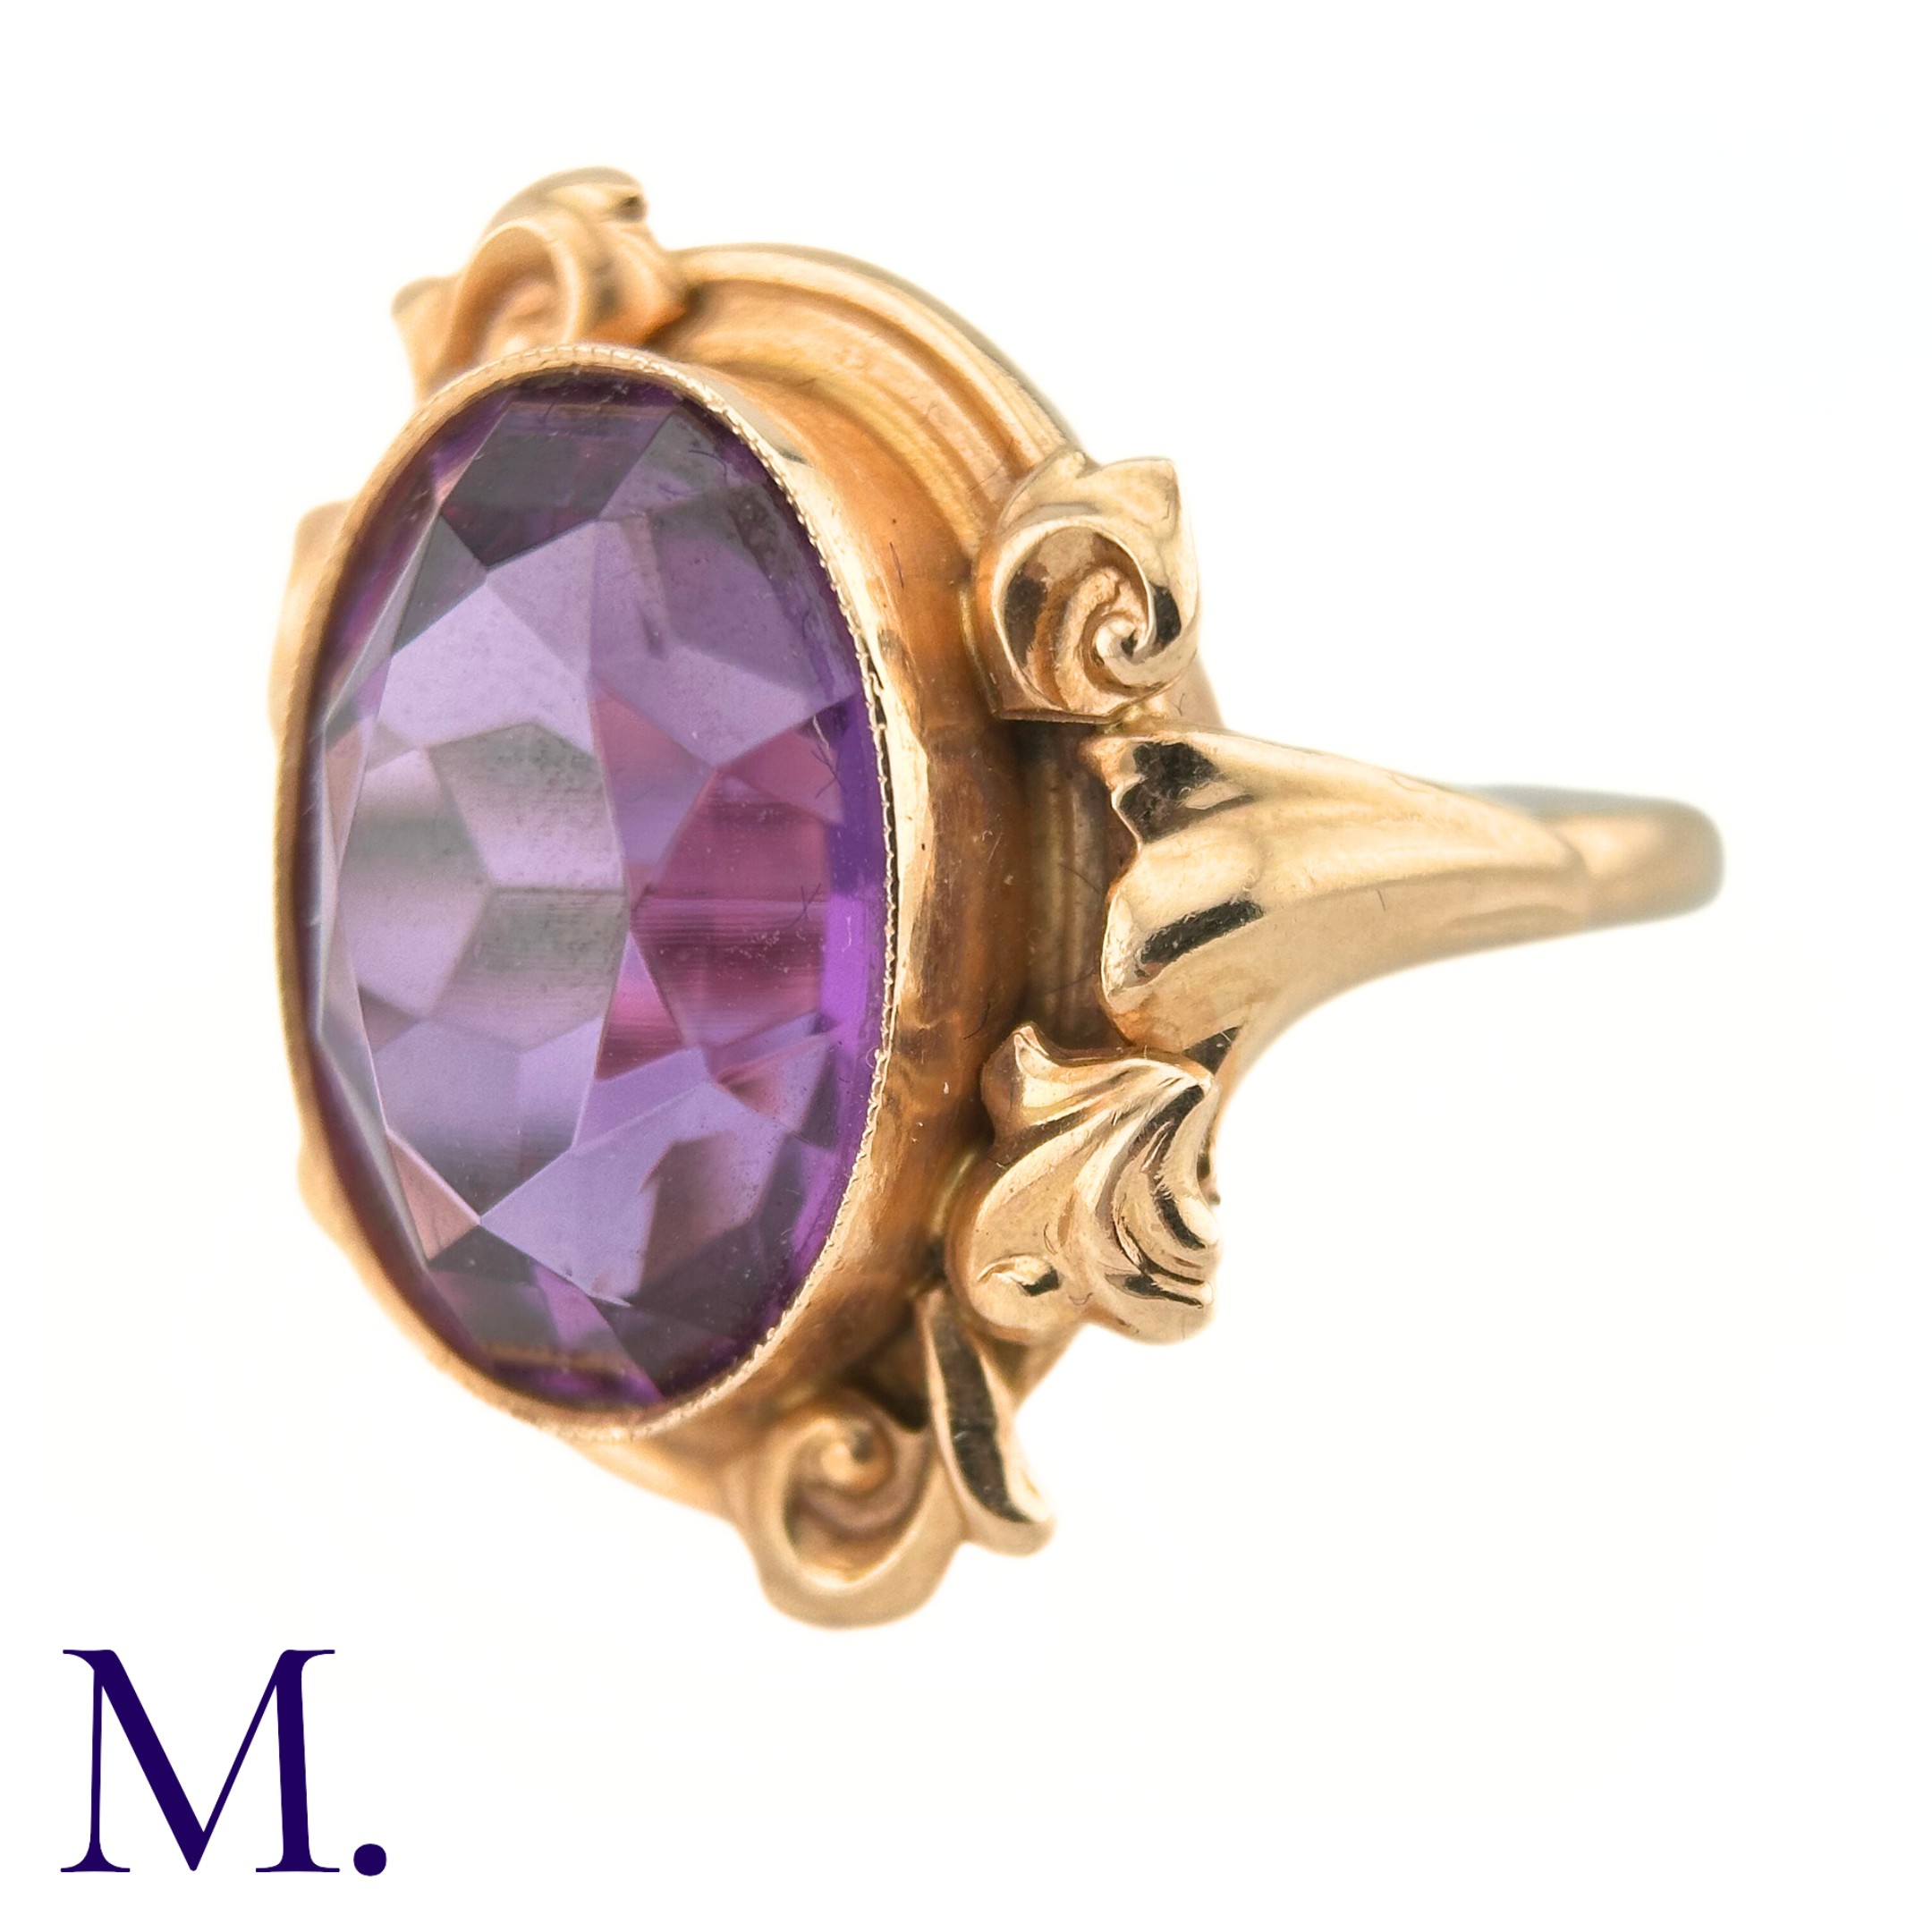 A Russian Purple Sapphire Ring The 14ct rose gold ring, with Russian hallmarks, is set with a - Image 2 of 6